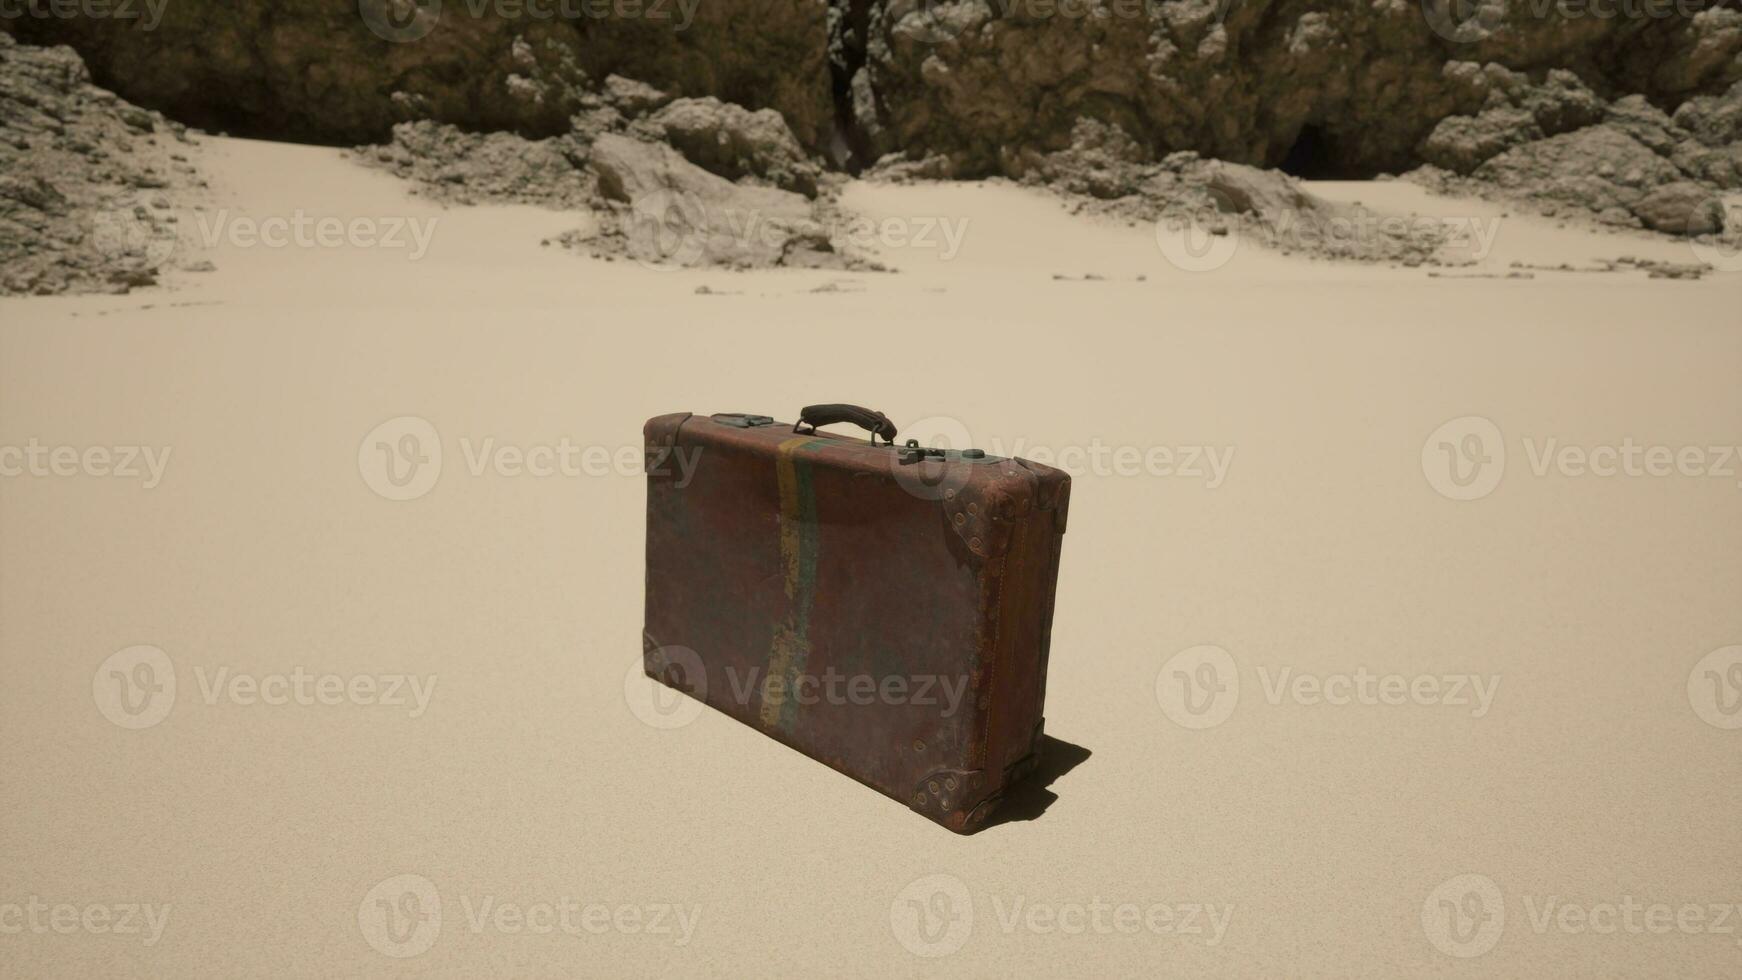 A piece of luggage sitting on top of a sandy beach photo